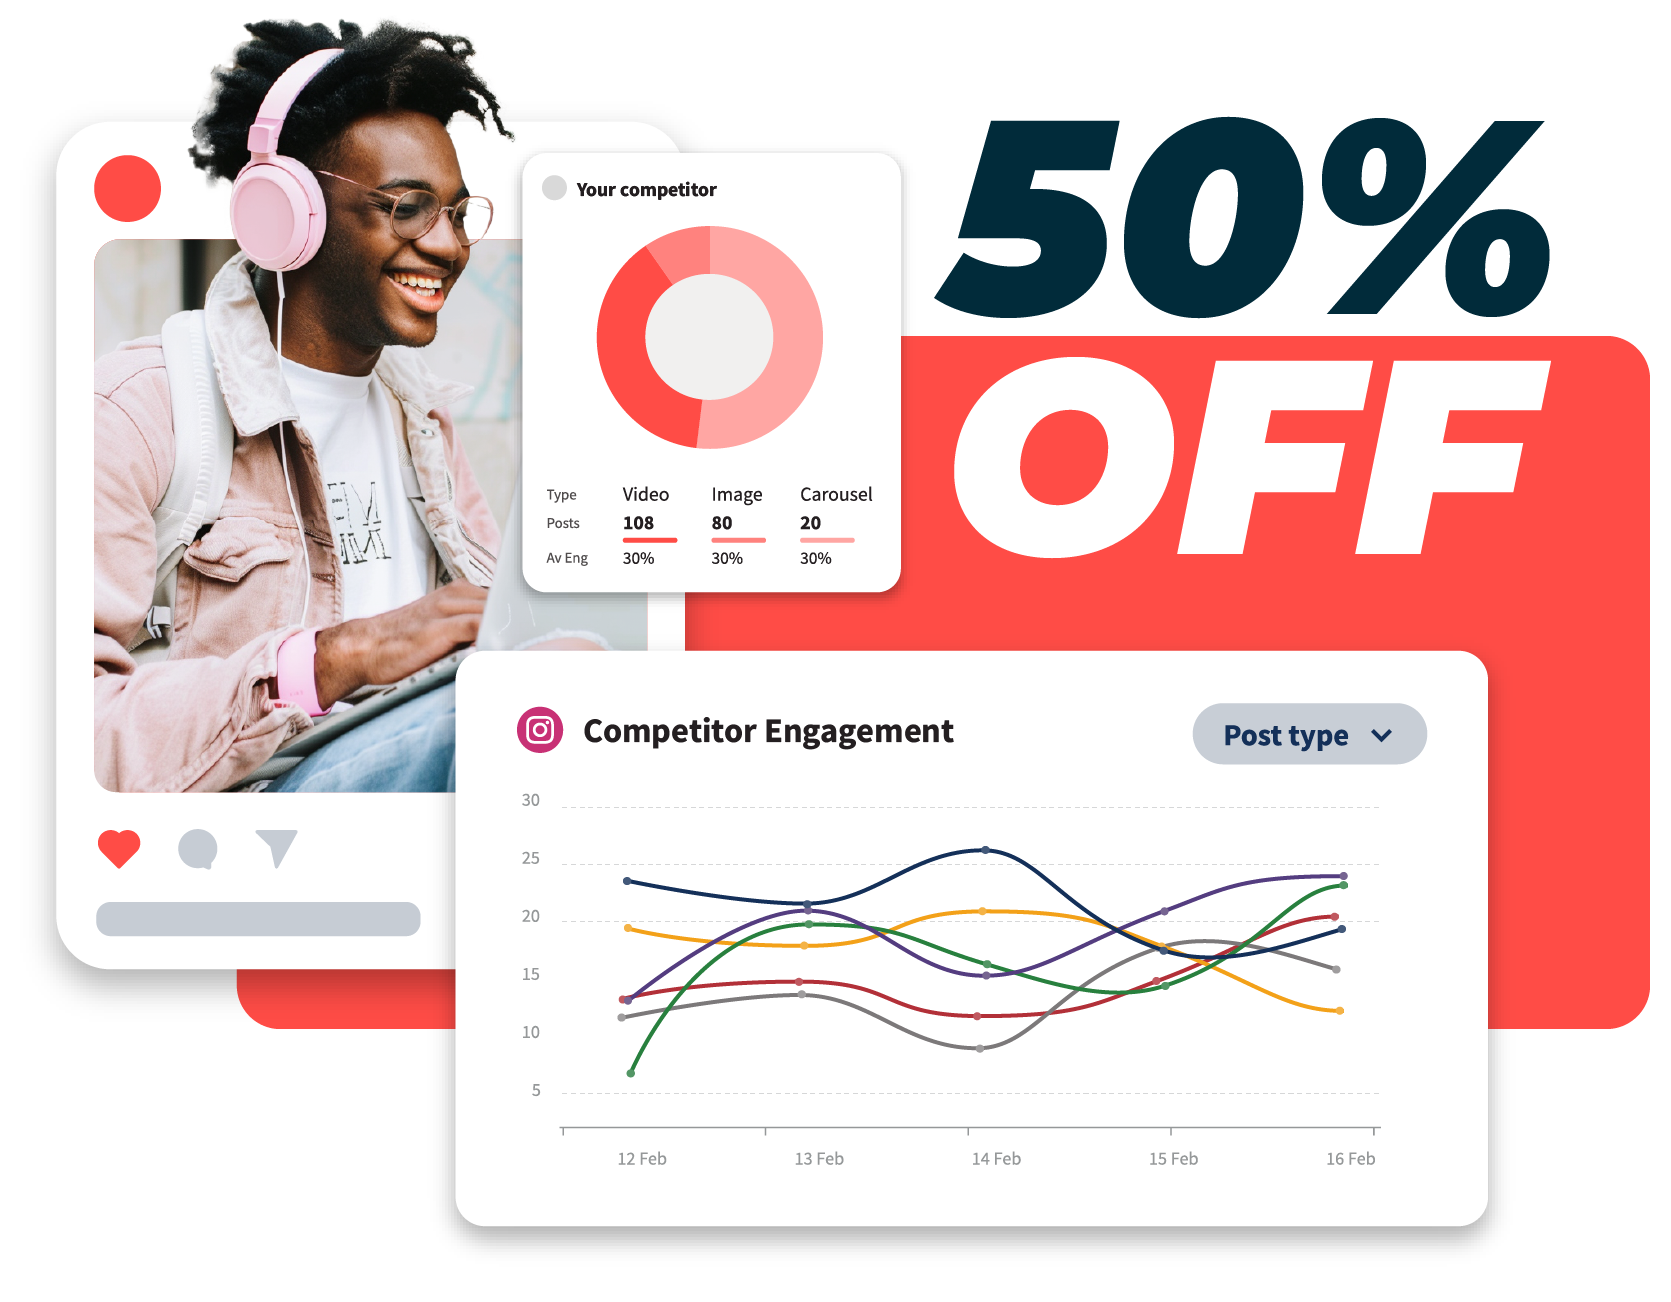 Large "50% Off" text, with a screenshot overlay displaying a chart with sample "Competitor Engagement" data.